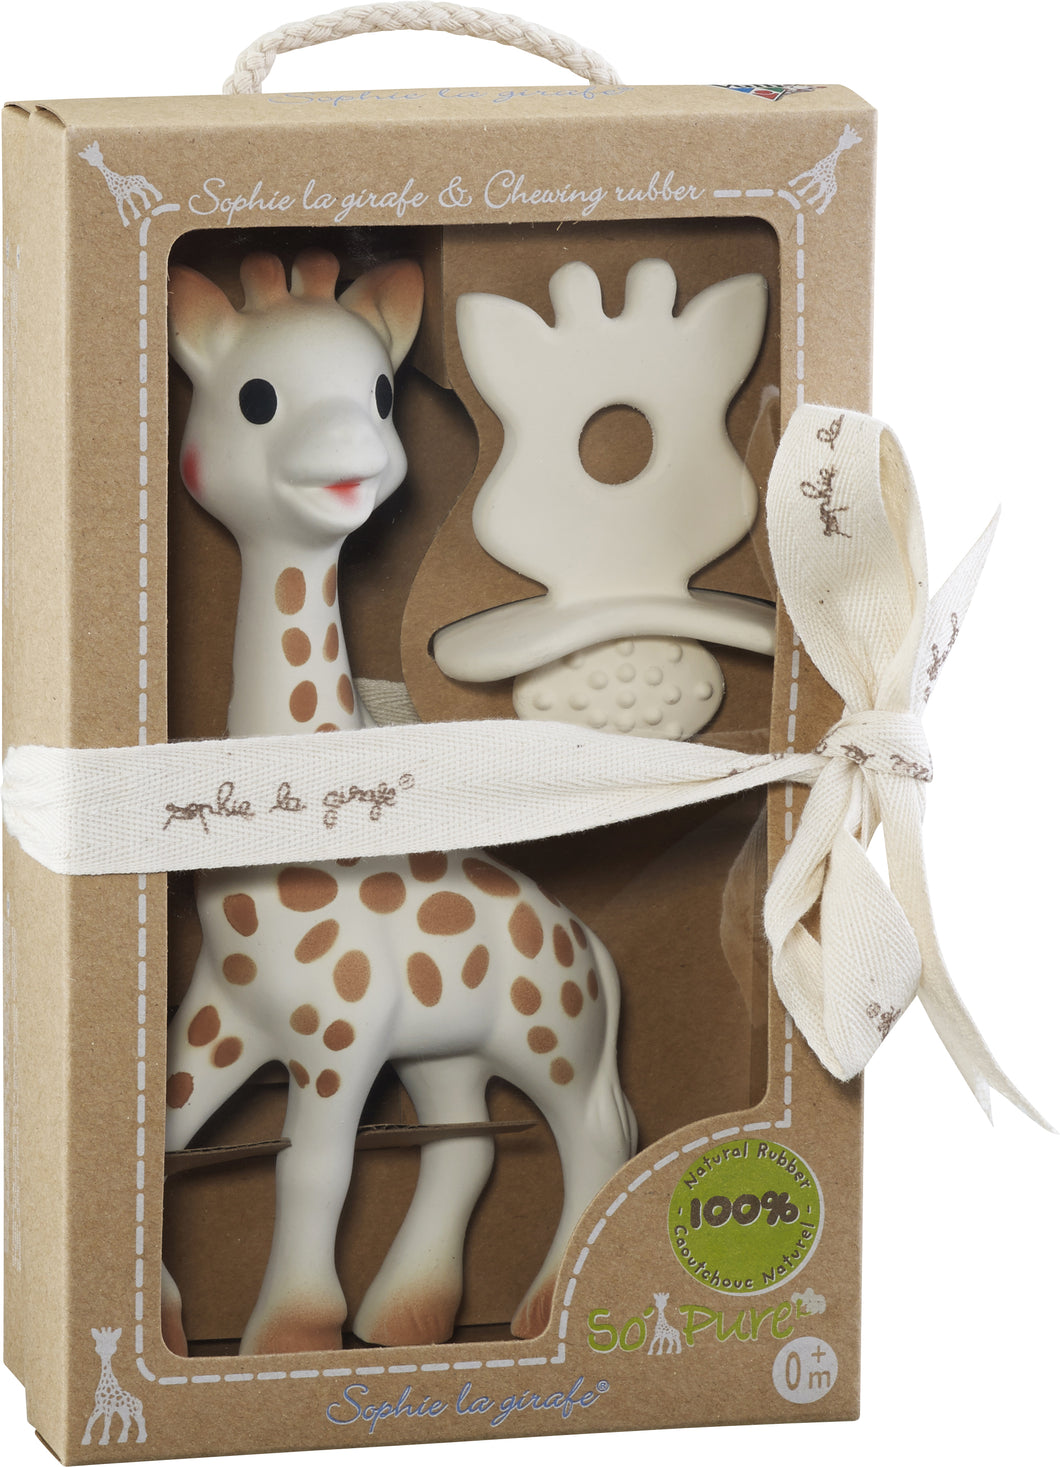 Sophie la Girafe - Teether Set https://babystuff.co.nz/products/sophie-la-girafe-teether-set The ideal gift for teething baby! Includes: Original Sophie the Giraffe, baby's first toy to stimulate all their senses A Natural Teether made from 100% natural rubber. Suitable from 0 months + Sales channels Manage Available on 4 of 4  Online Store  Facebook Mobile App Aftership store connector Organization Product type  toys Vendor  www.babystuff.co.nz Collections There are no collections available to add this pro